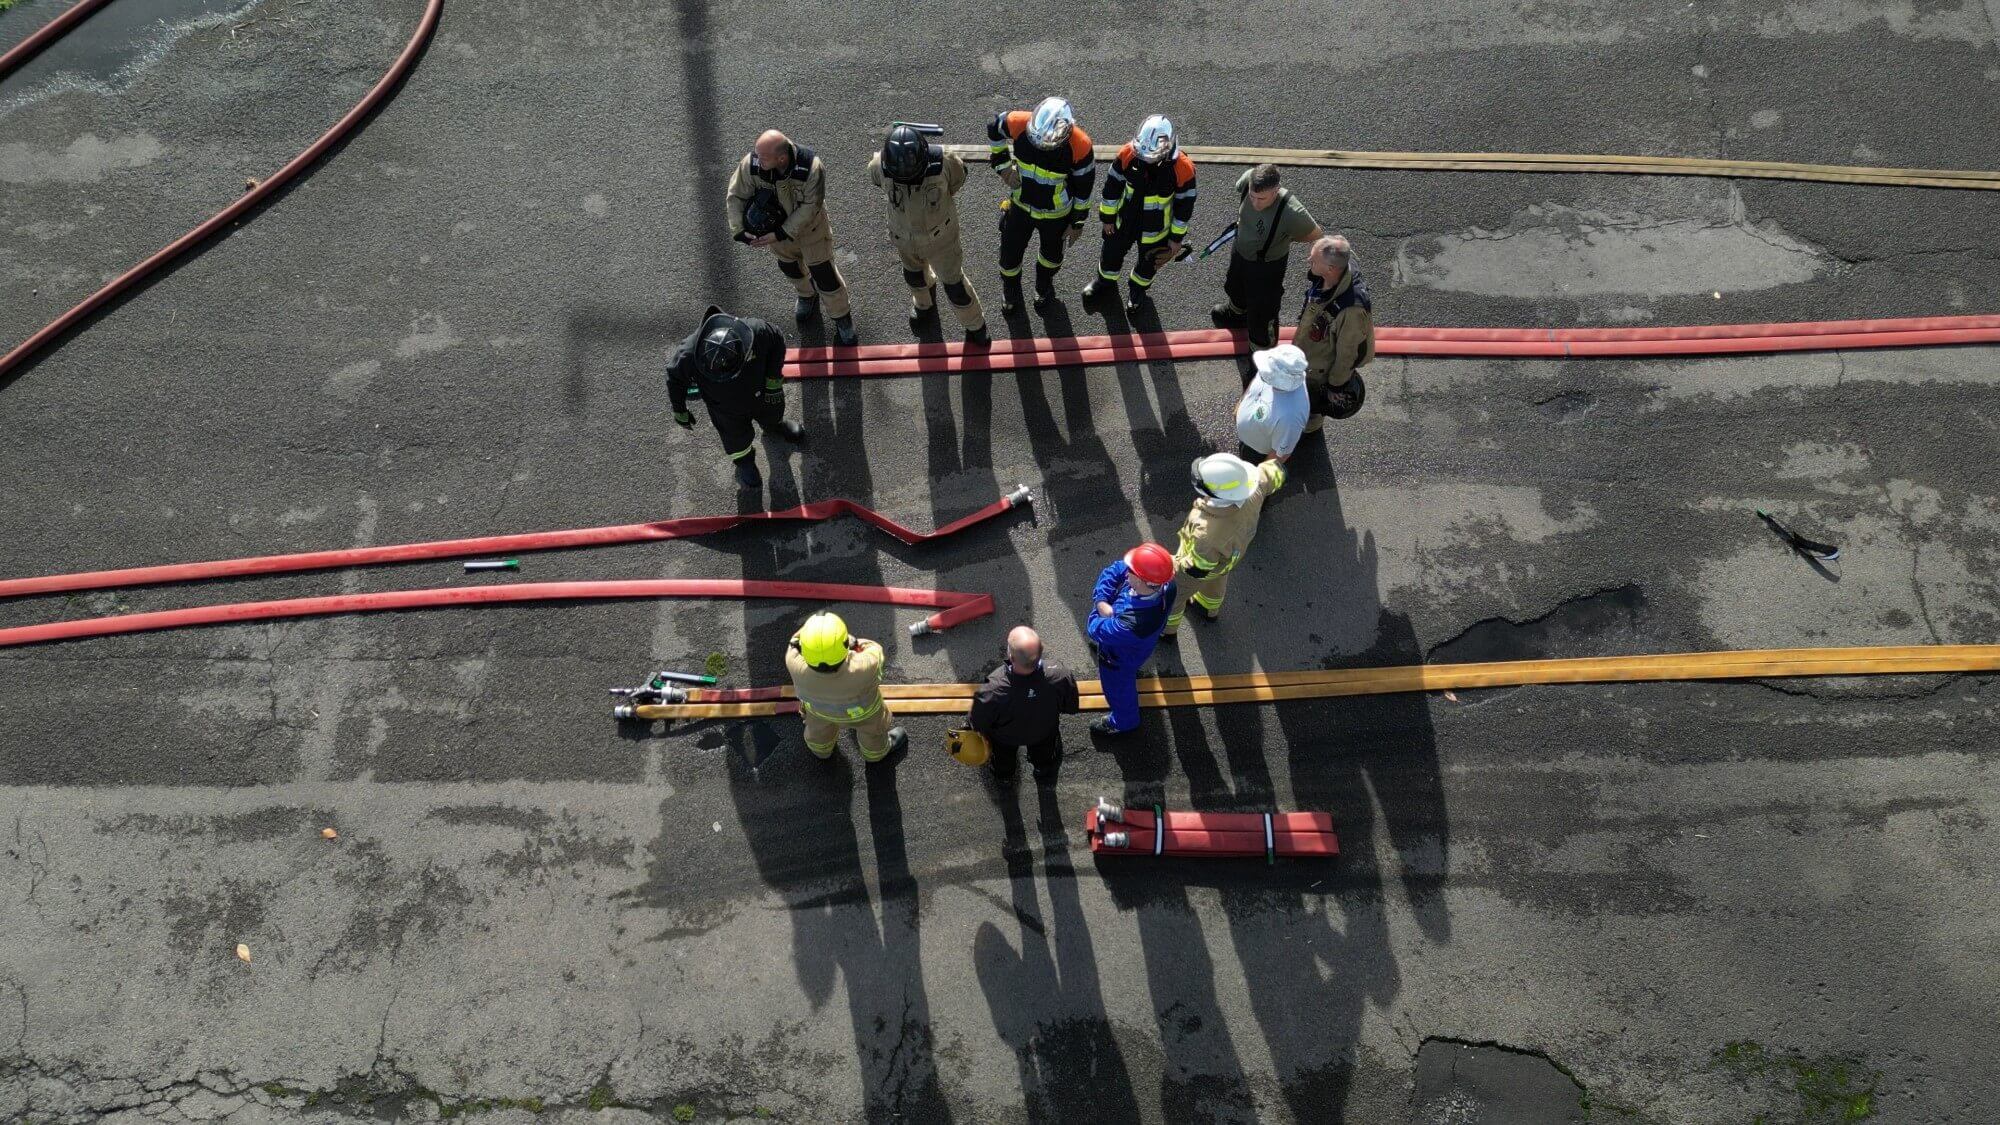 Firefighter fire hose training group aerial view